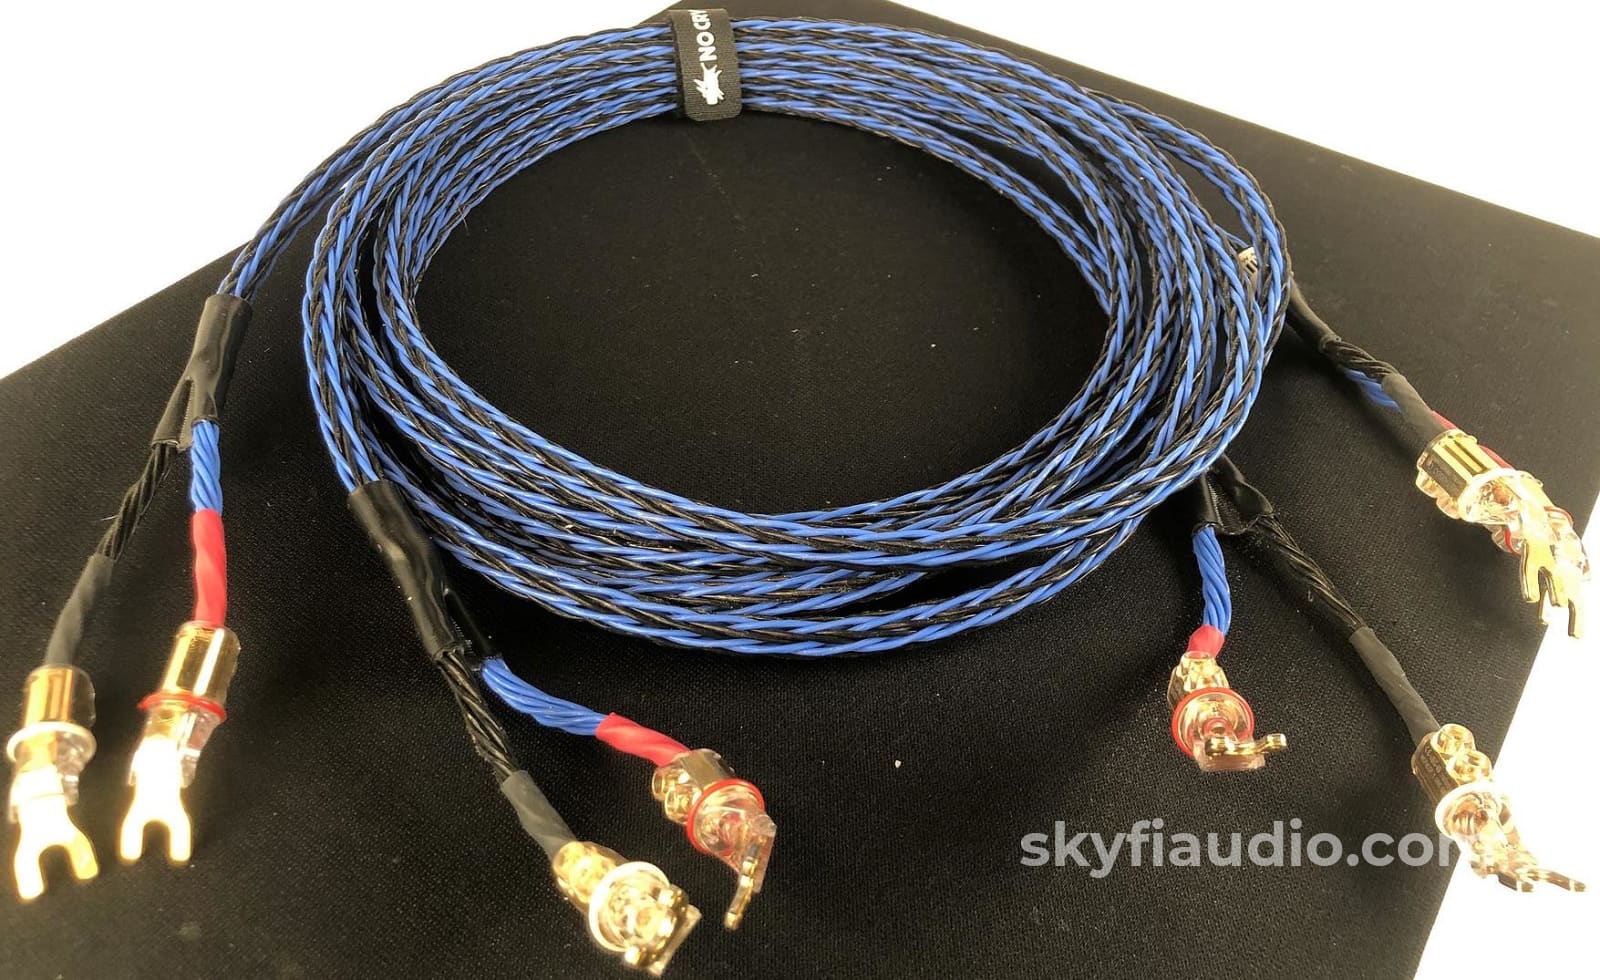 Kimber Kable 8Tc Series Speaker Cables With Wbt Connectors - 10